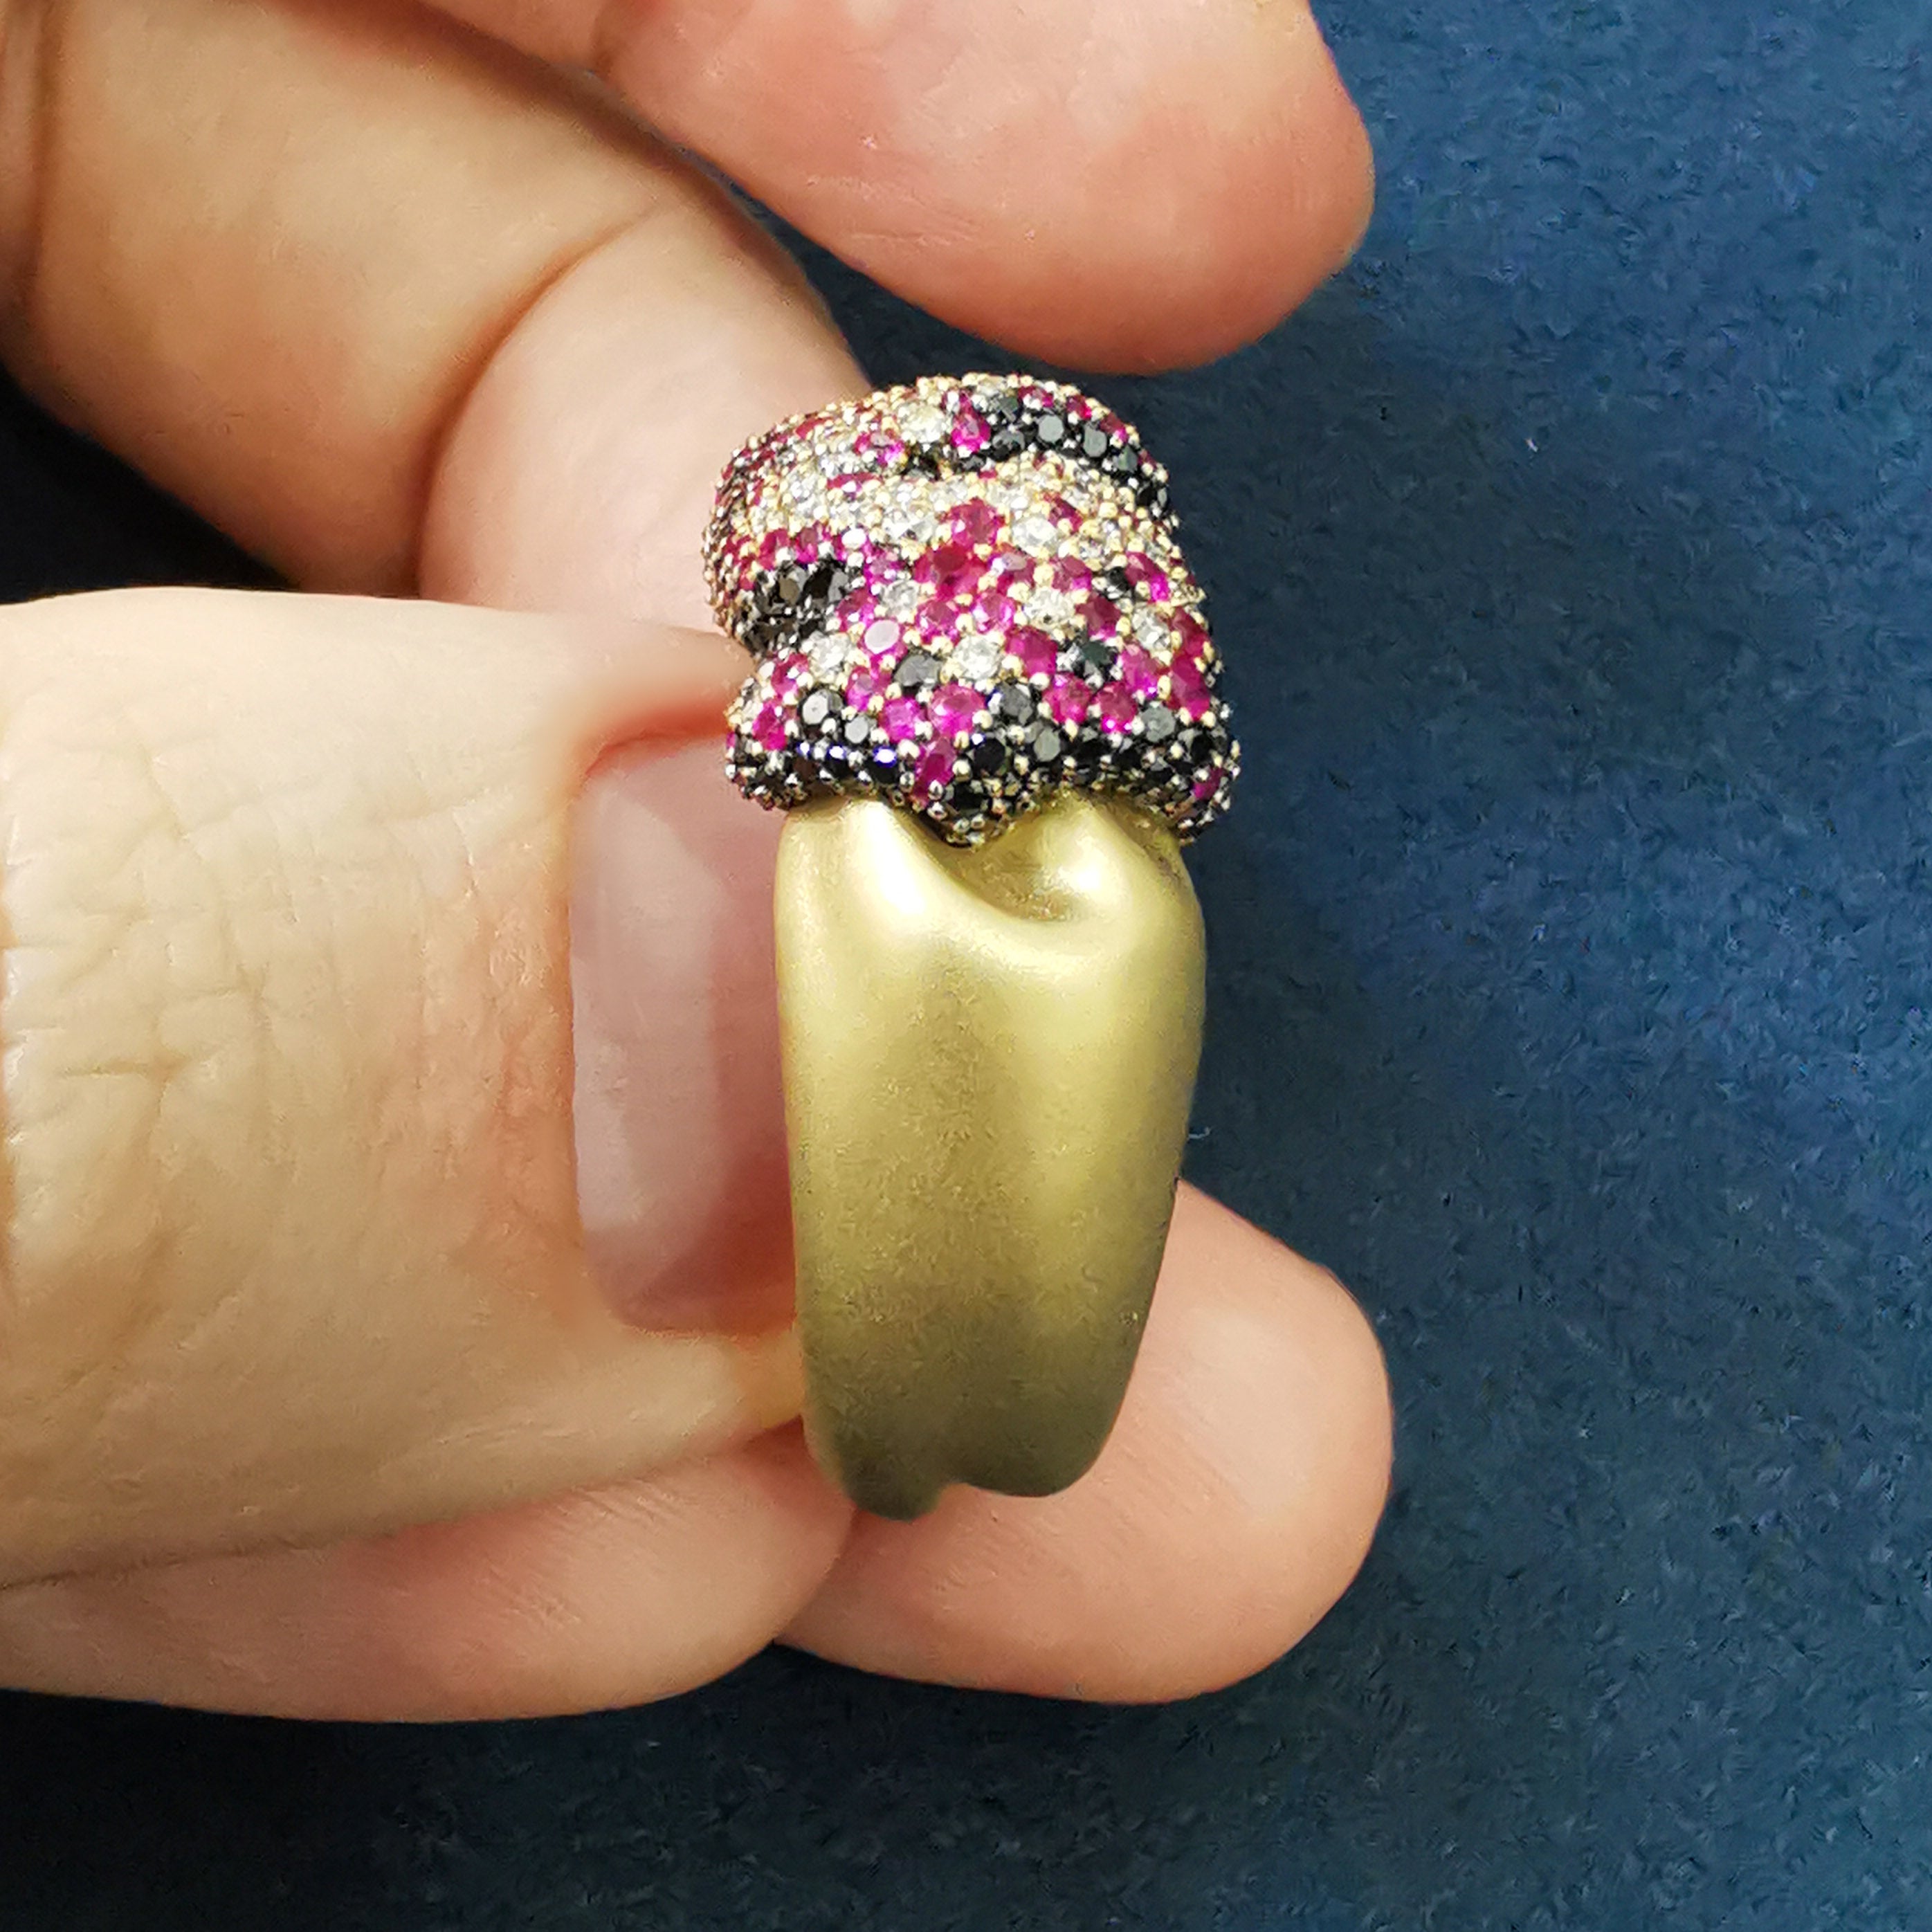 R 0132-3, 18K Yellow Gold, Ruby, Champagne and Black Diamonds Small Ring